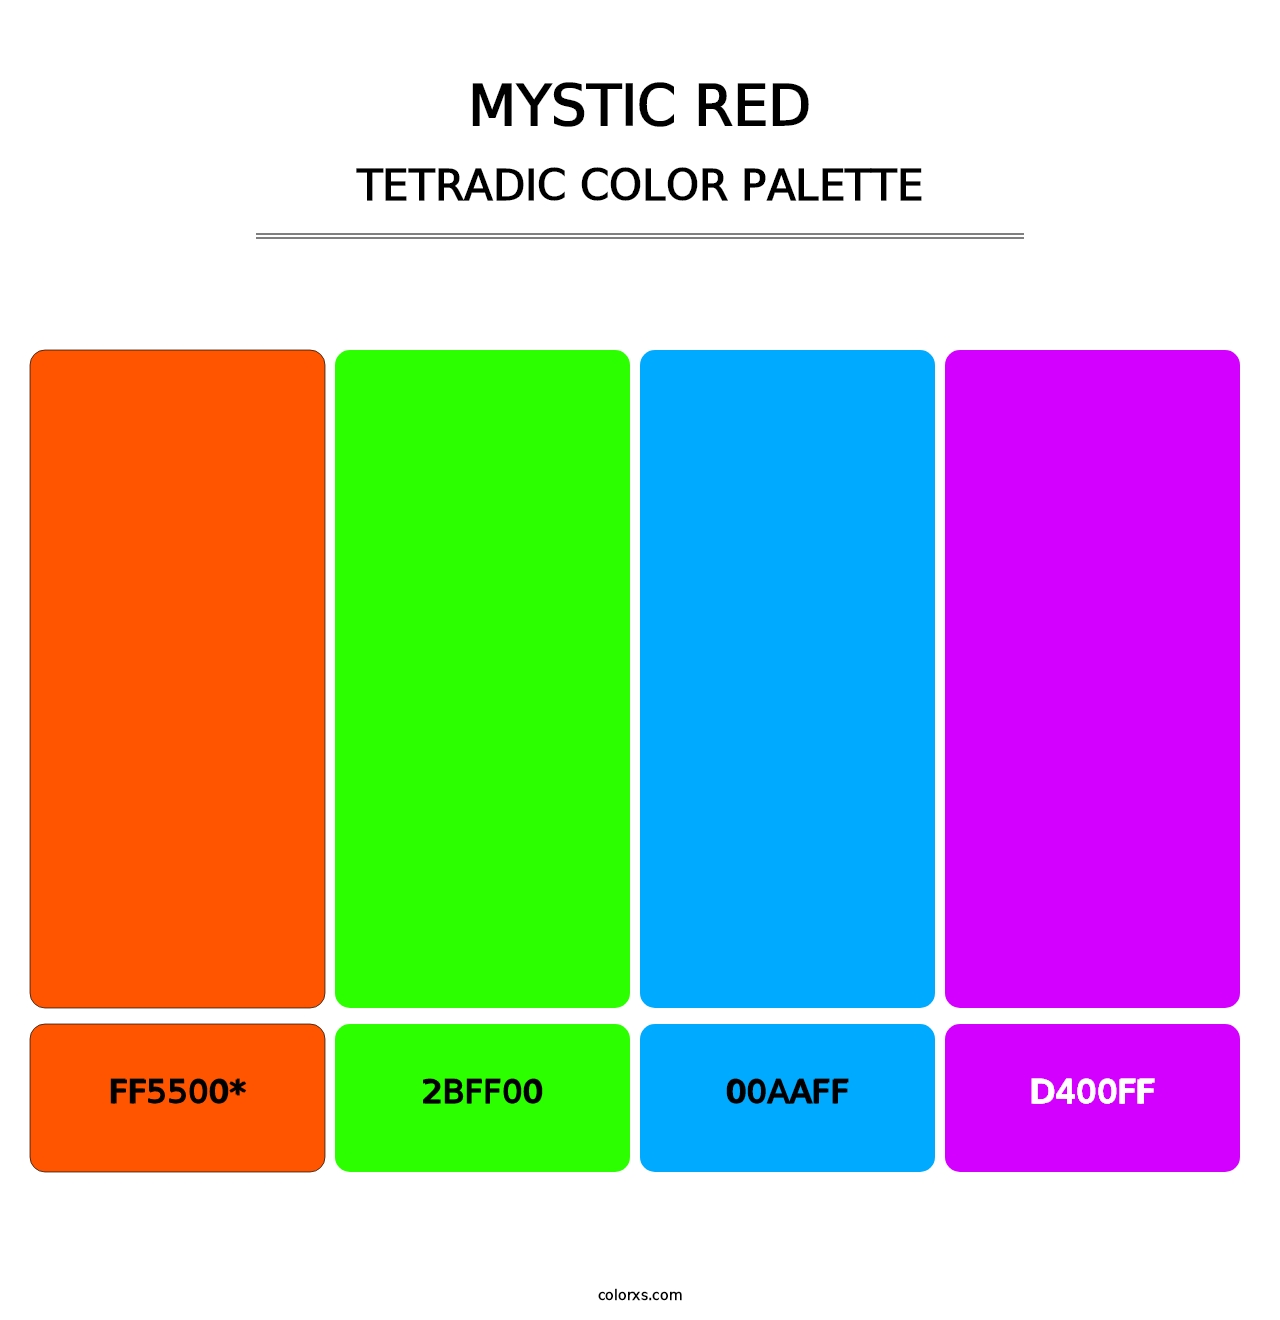 Mystic Red - Tetradic Color Palette